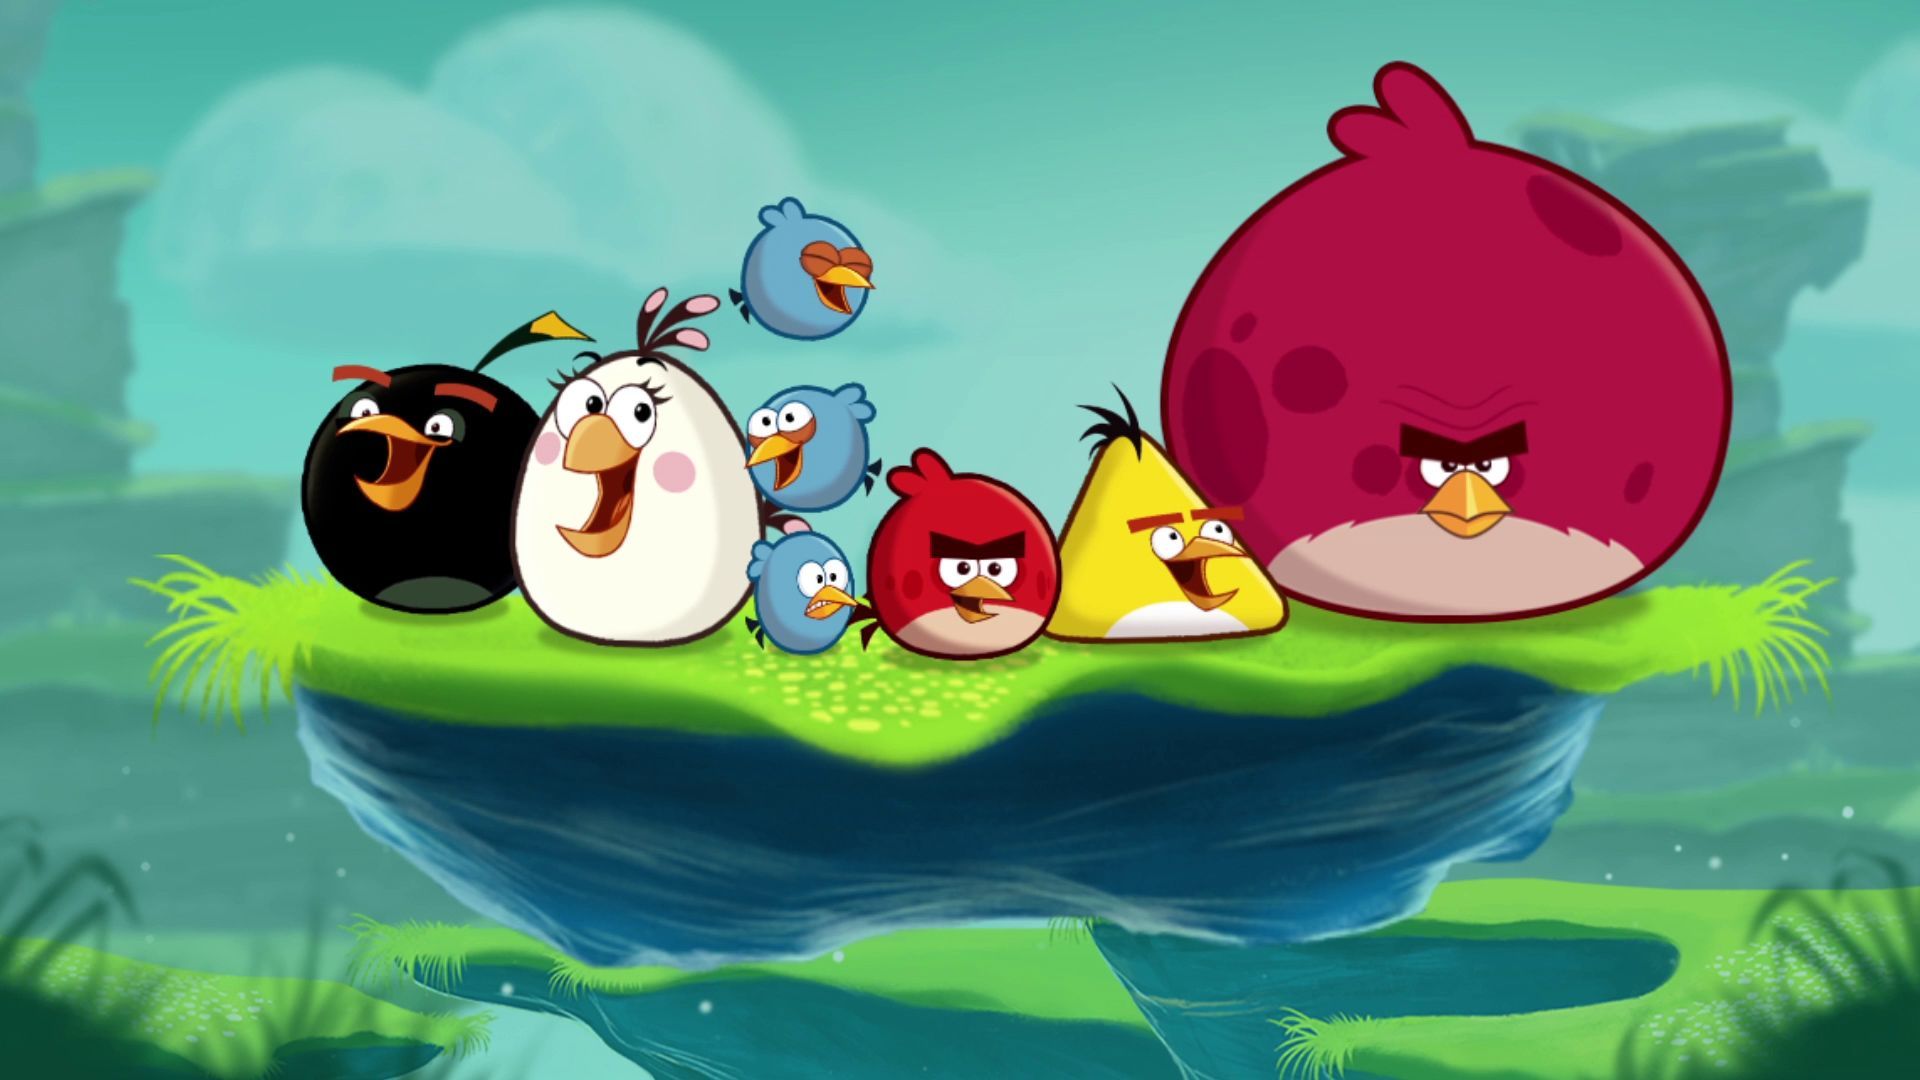 Angry bird backgrounds